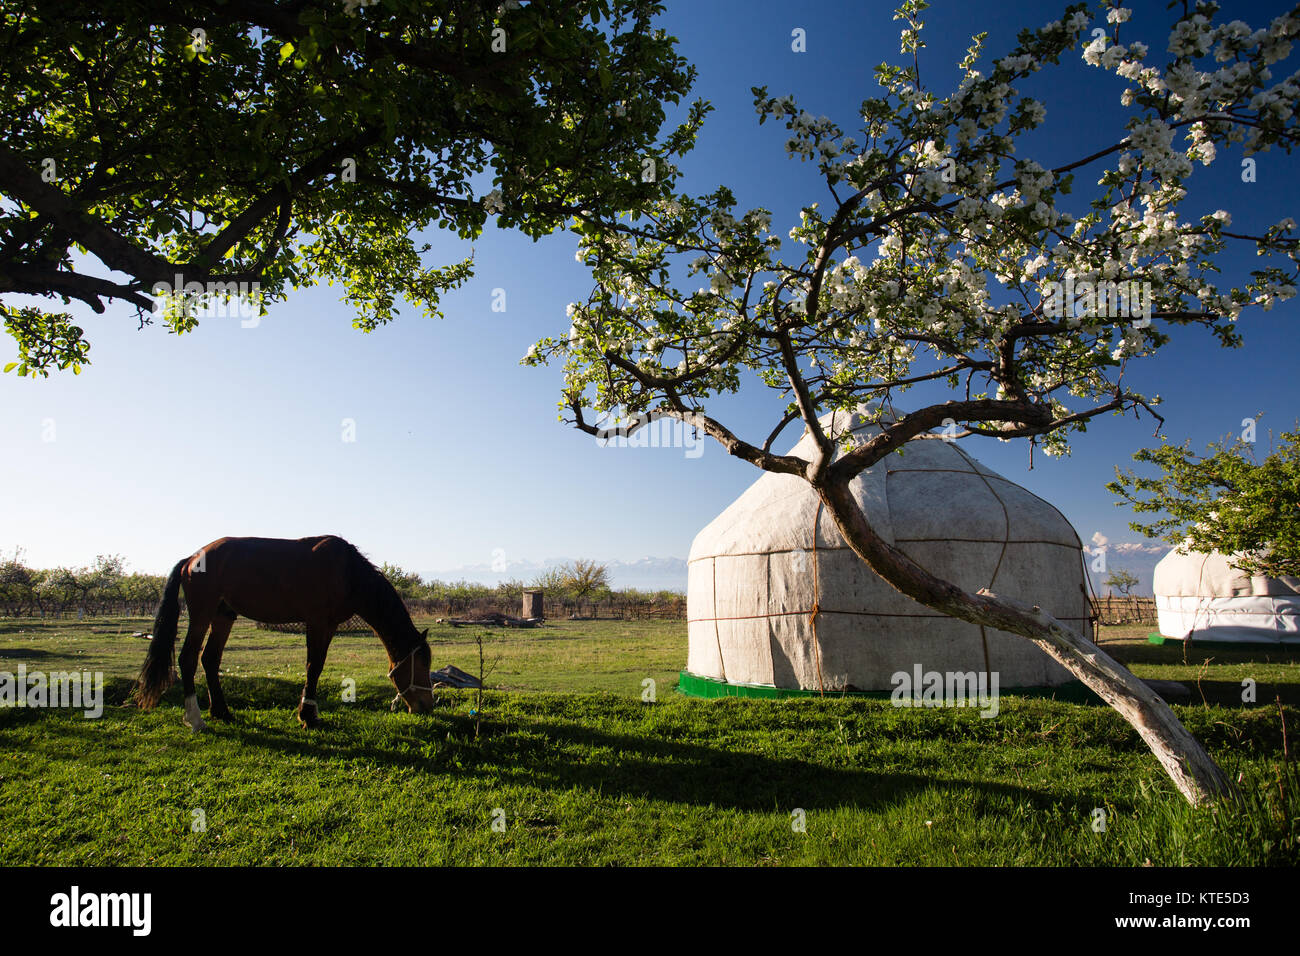 A horse and yurt at Almaluu tourist yurt camp on the southern shore of Issyk-Kol Lake in Kyrgyzstan. Stock Photo